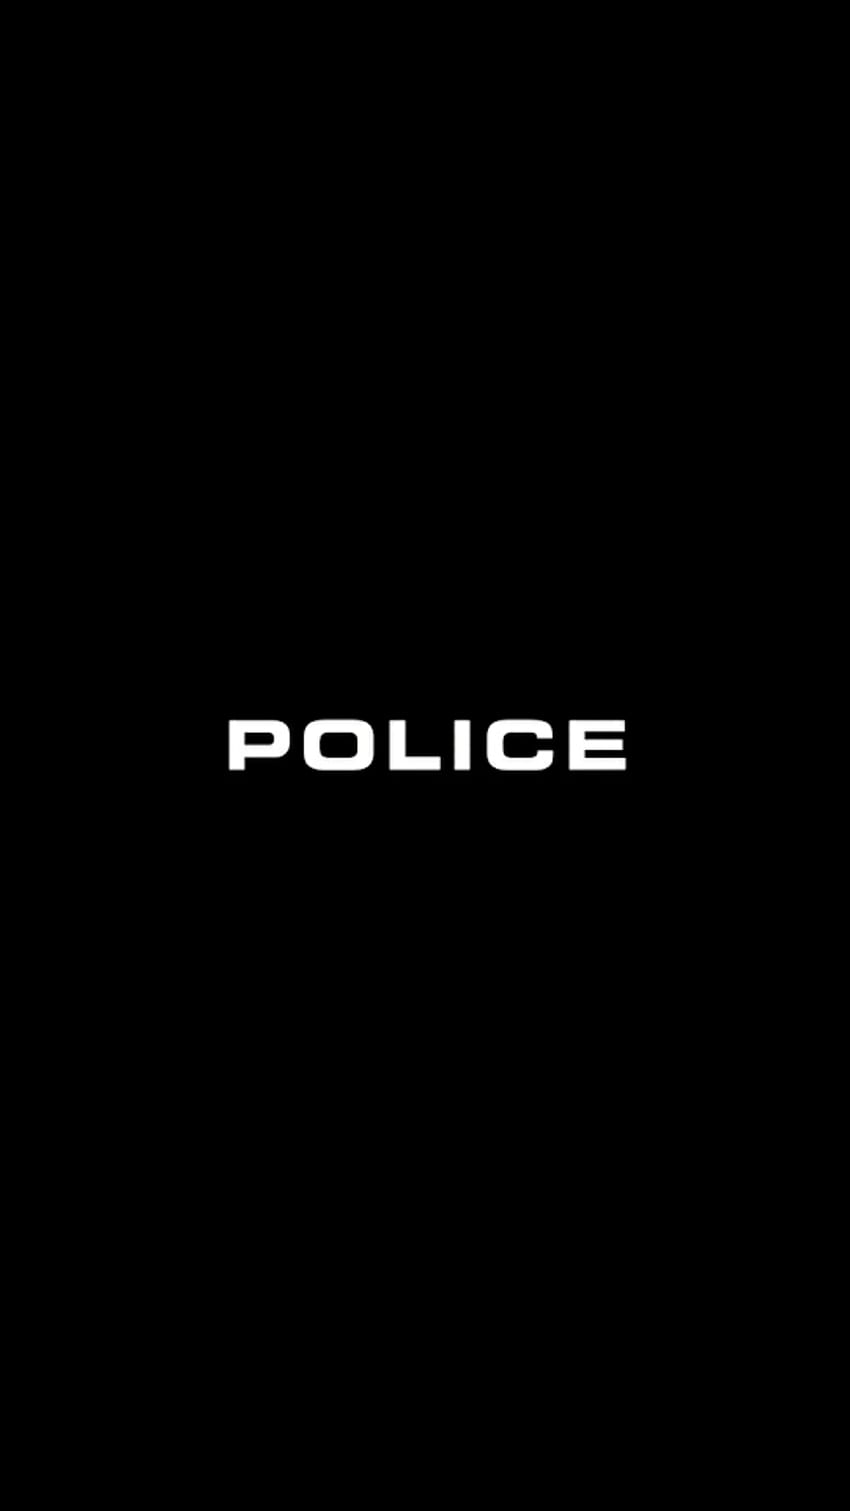 Download Police Frame wallpaper by Frames  8b  Free on ZEDGE now Browse  millions of popular Fra  Framed wallpaper Iphone red wallpaper Iphone  wallpaper blur